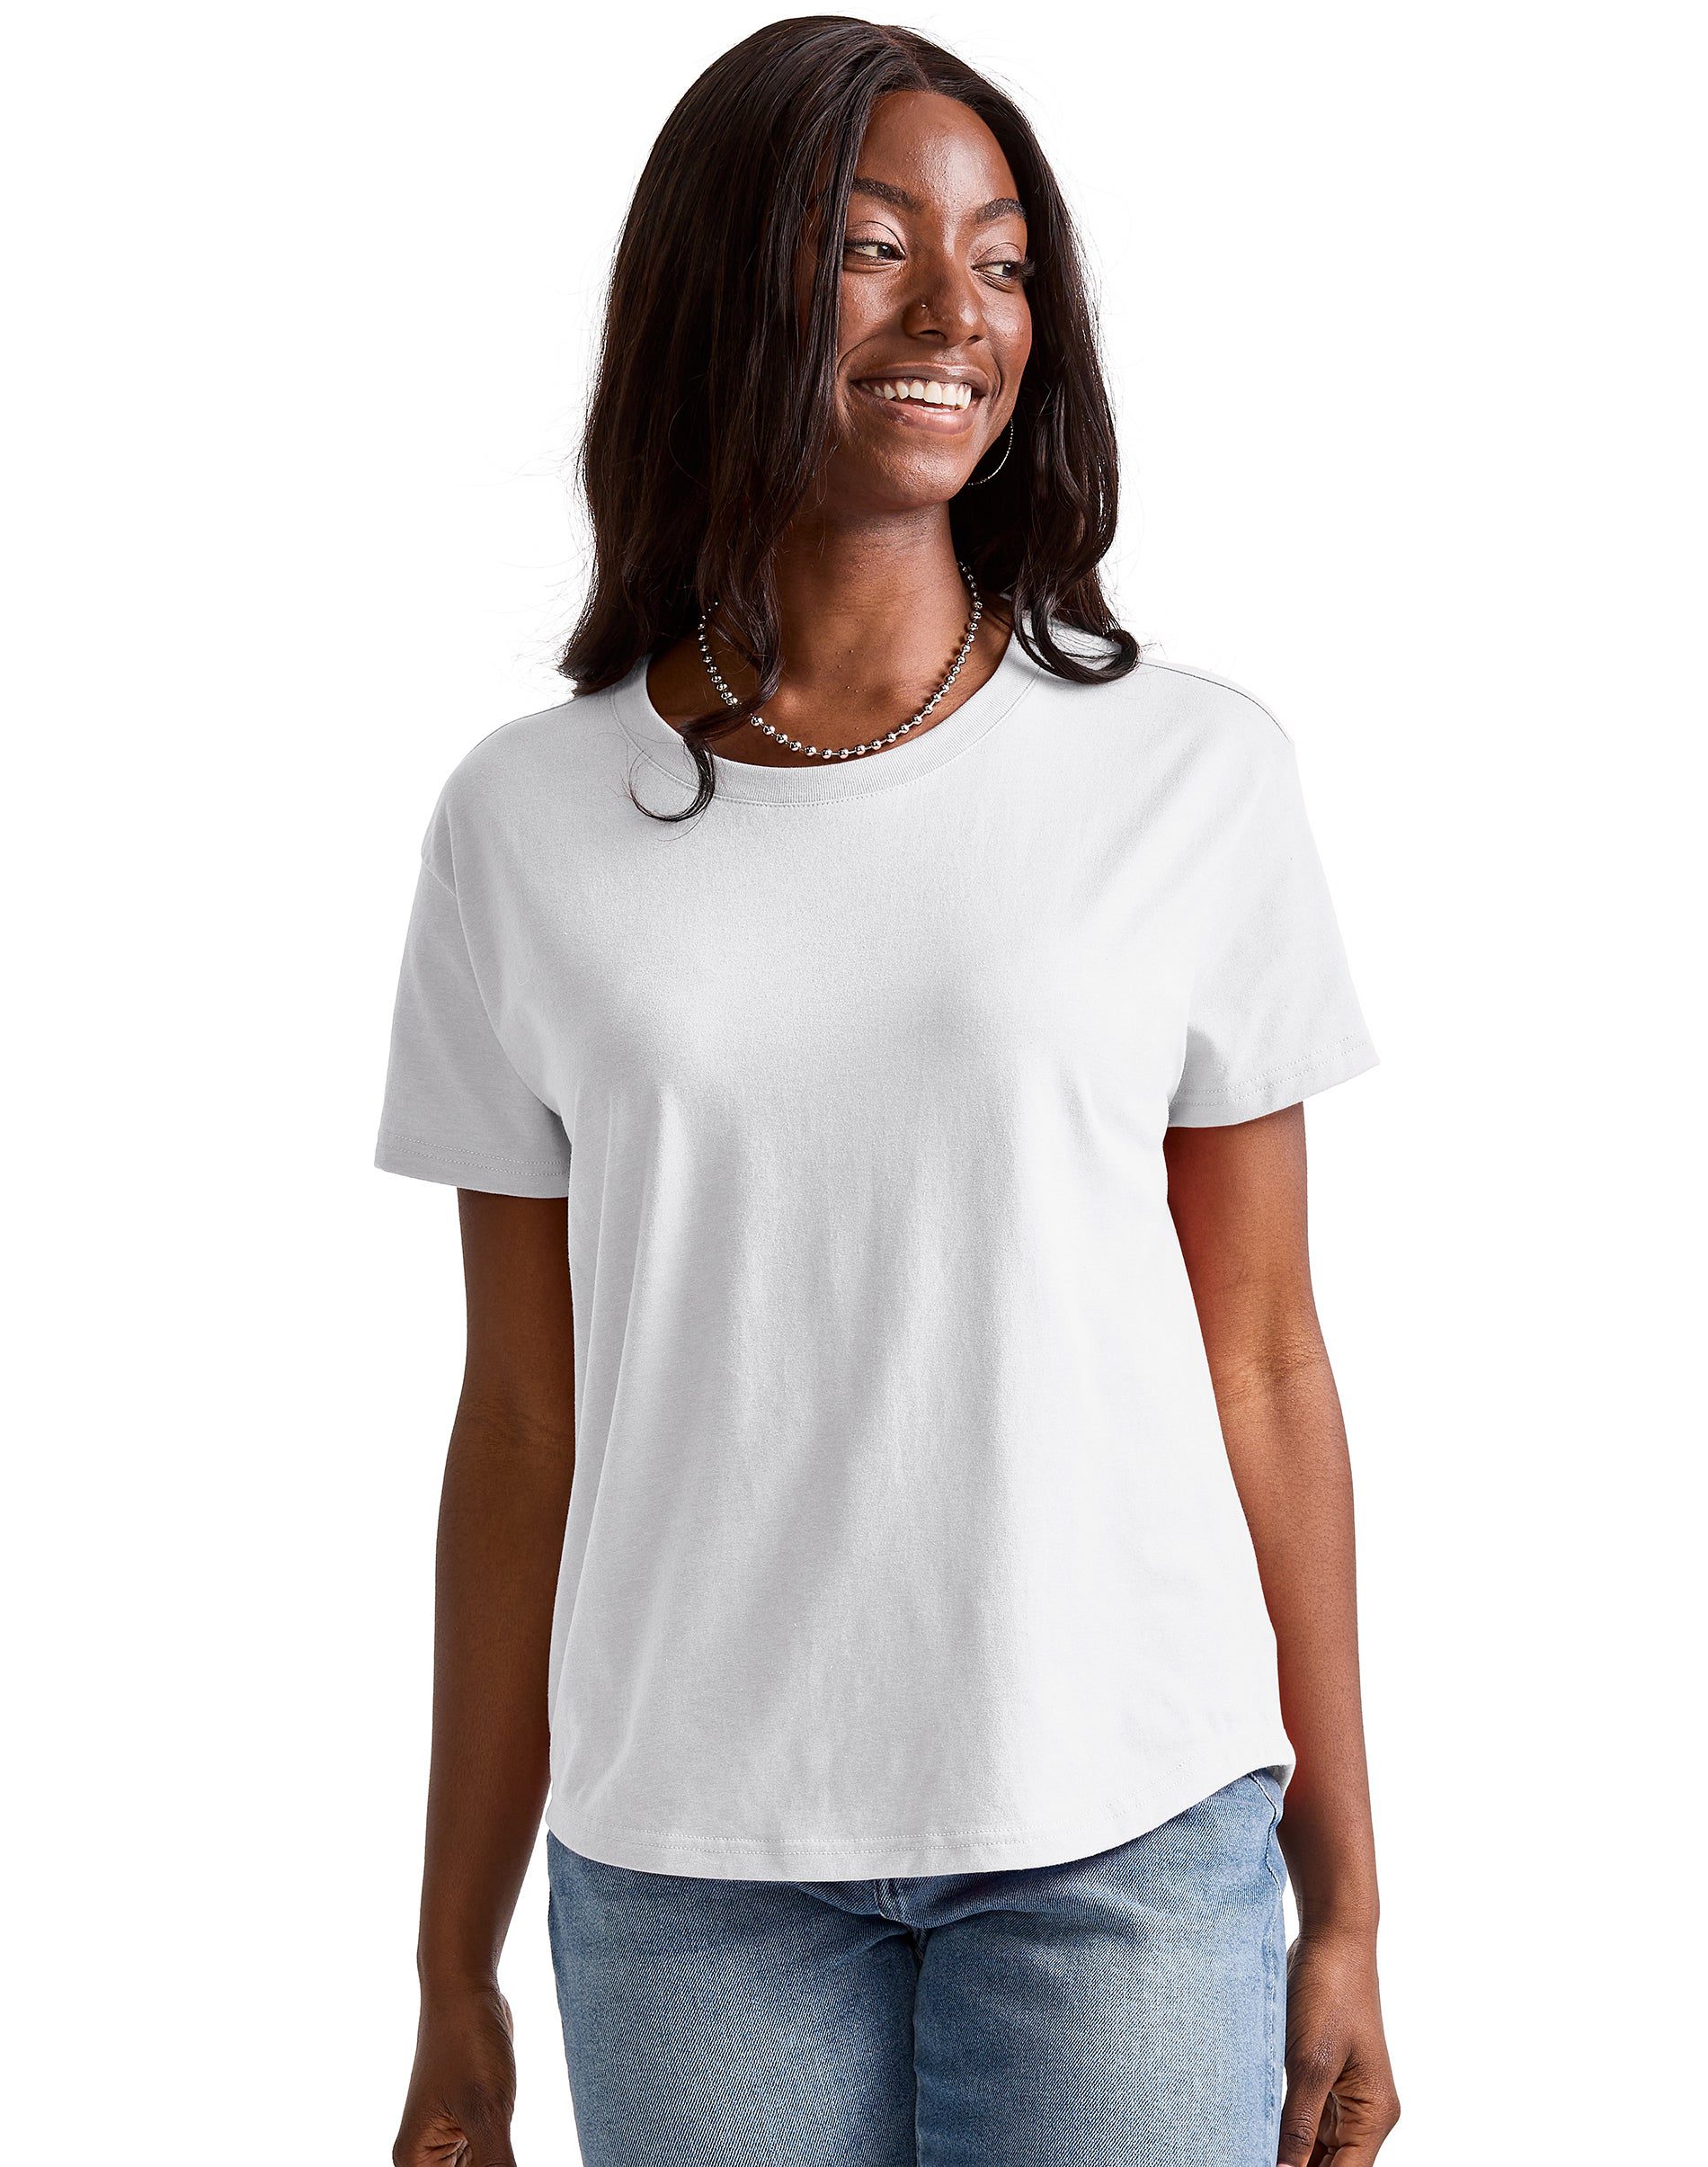 Hanes Originals Womens Relaxed Fit Cotton T-Shirt